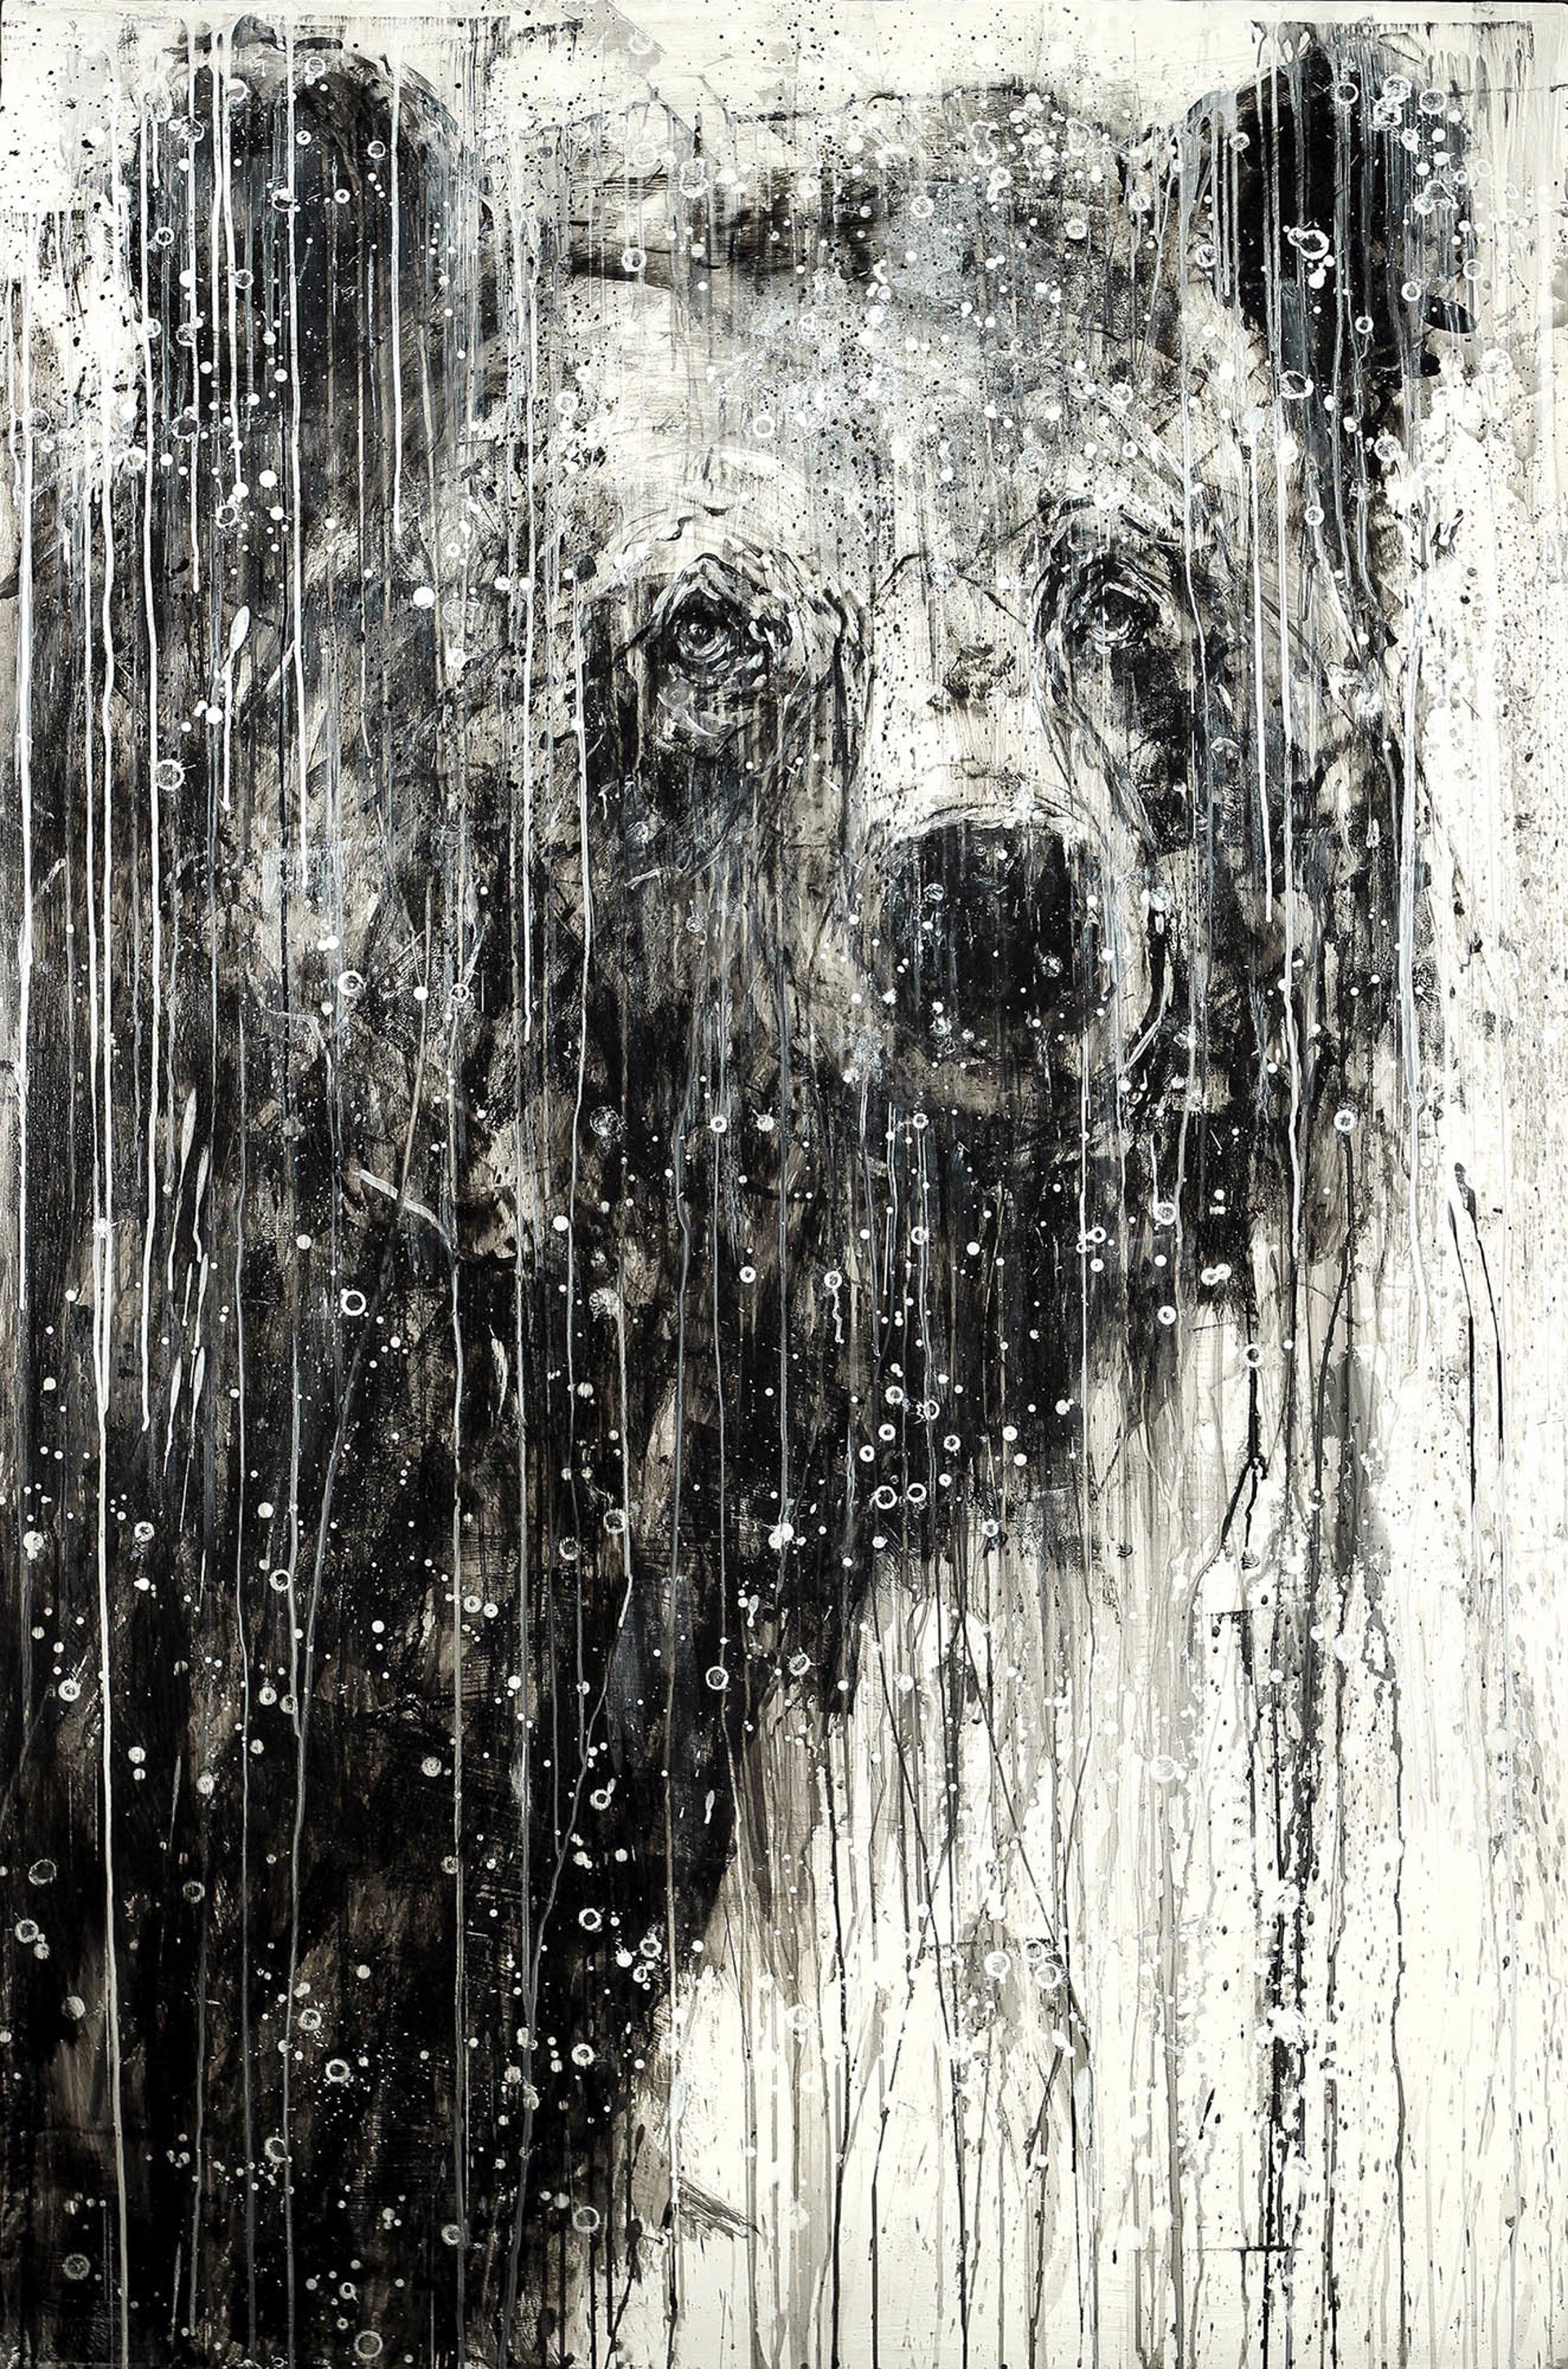 A Painting Of An Expressive Contemporary Style Bear Portrait In Black And White  With Drips, By Matt Flint, Available At Gallery Wild